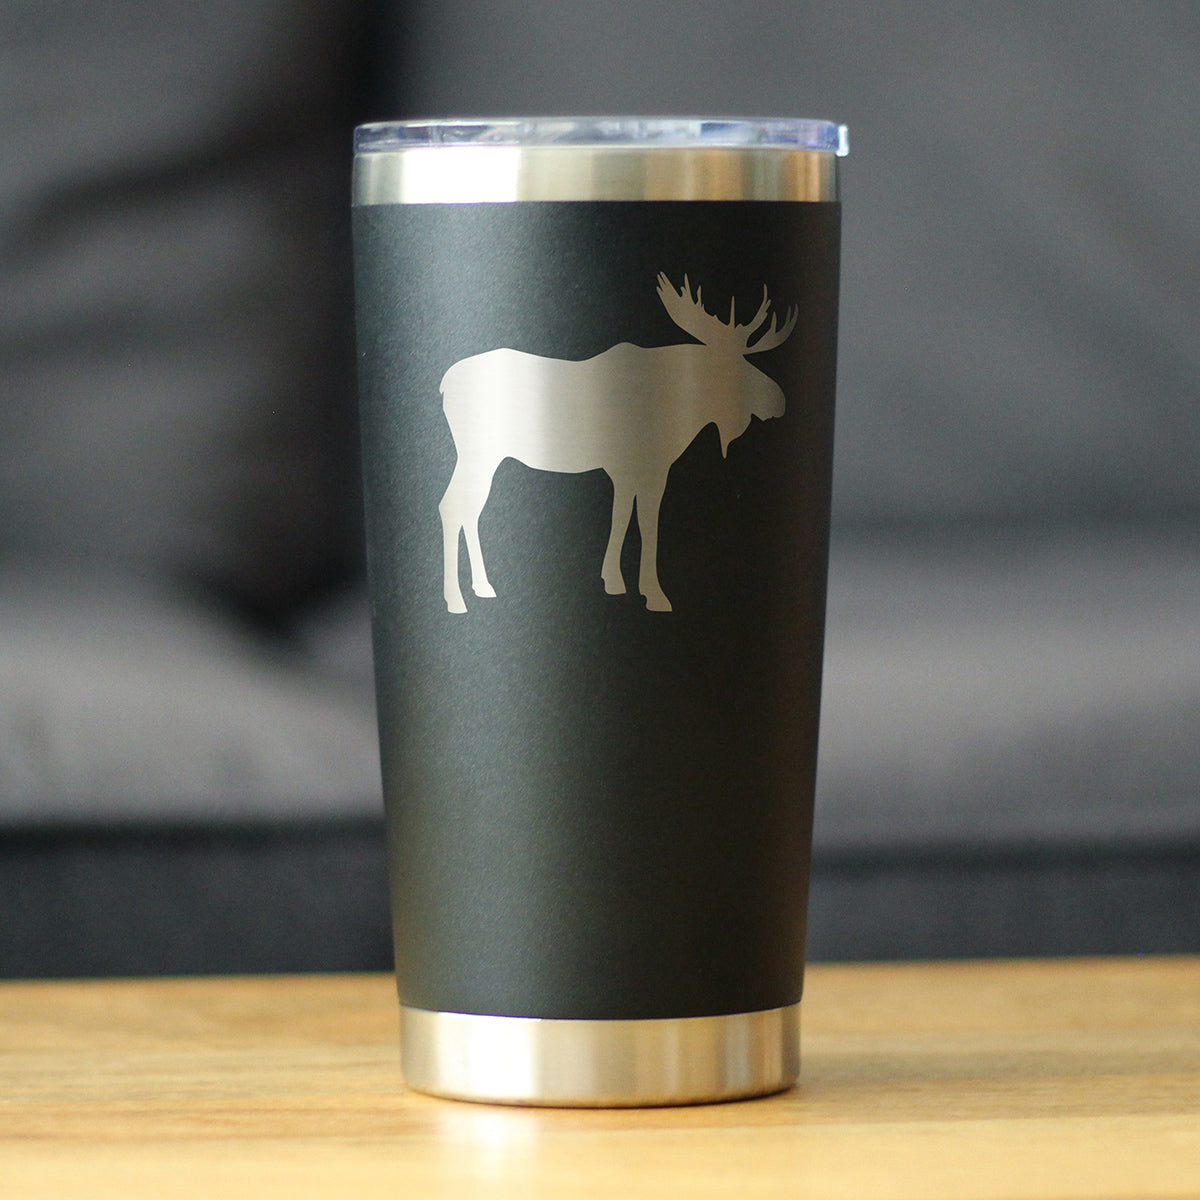 Moose Silhouette - Insulated Coffee Tumbler Cup with Sliding Lid - Stainless Steel Travel Mug - Outdoor Camping Gift for Women and Men